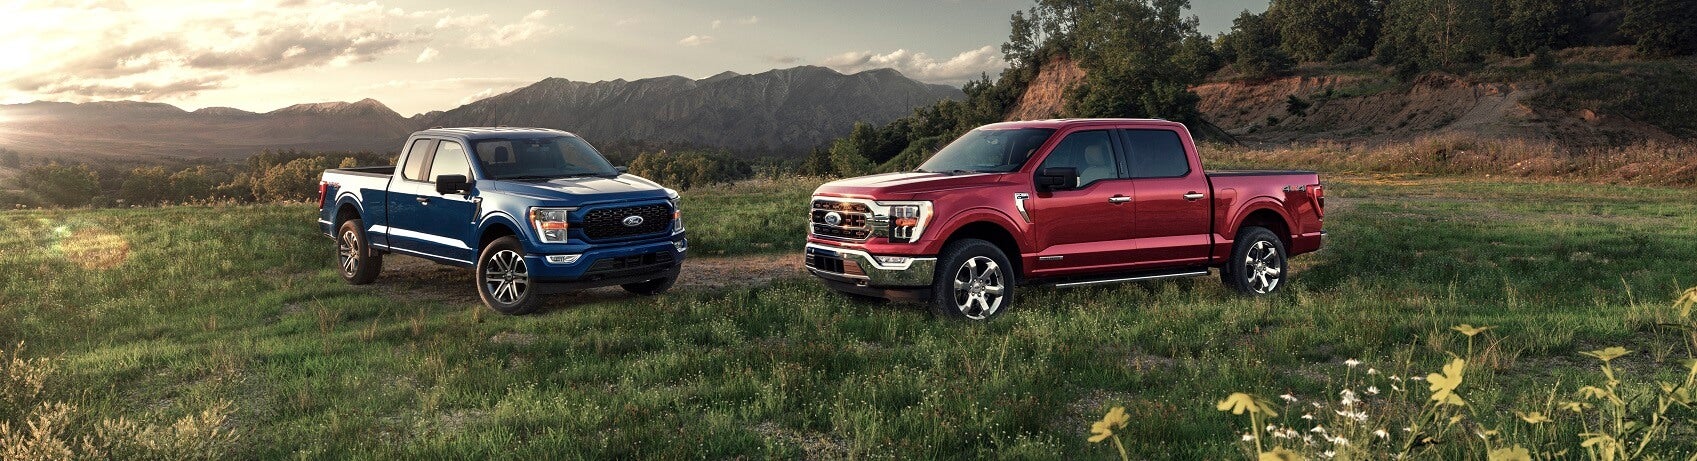 Ford F150 Blue and Maroon in Field